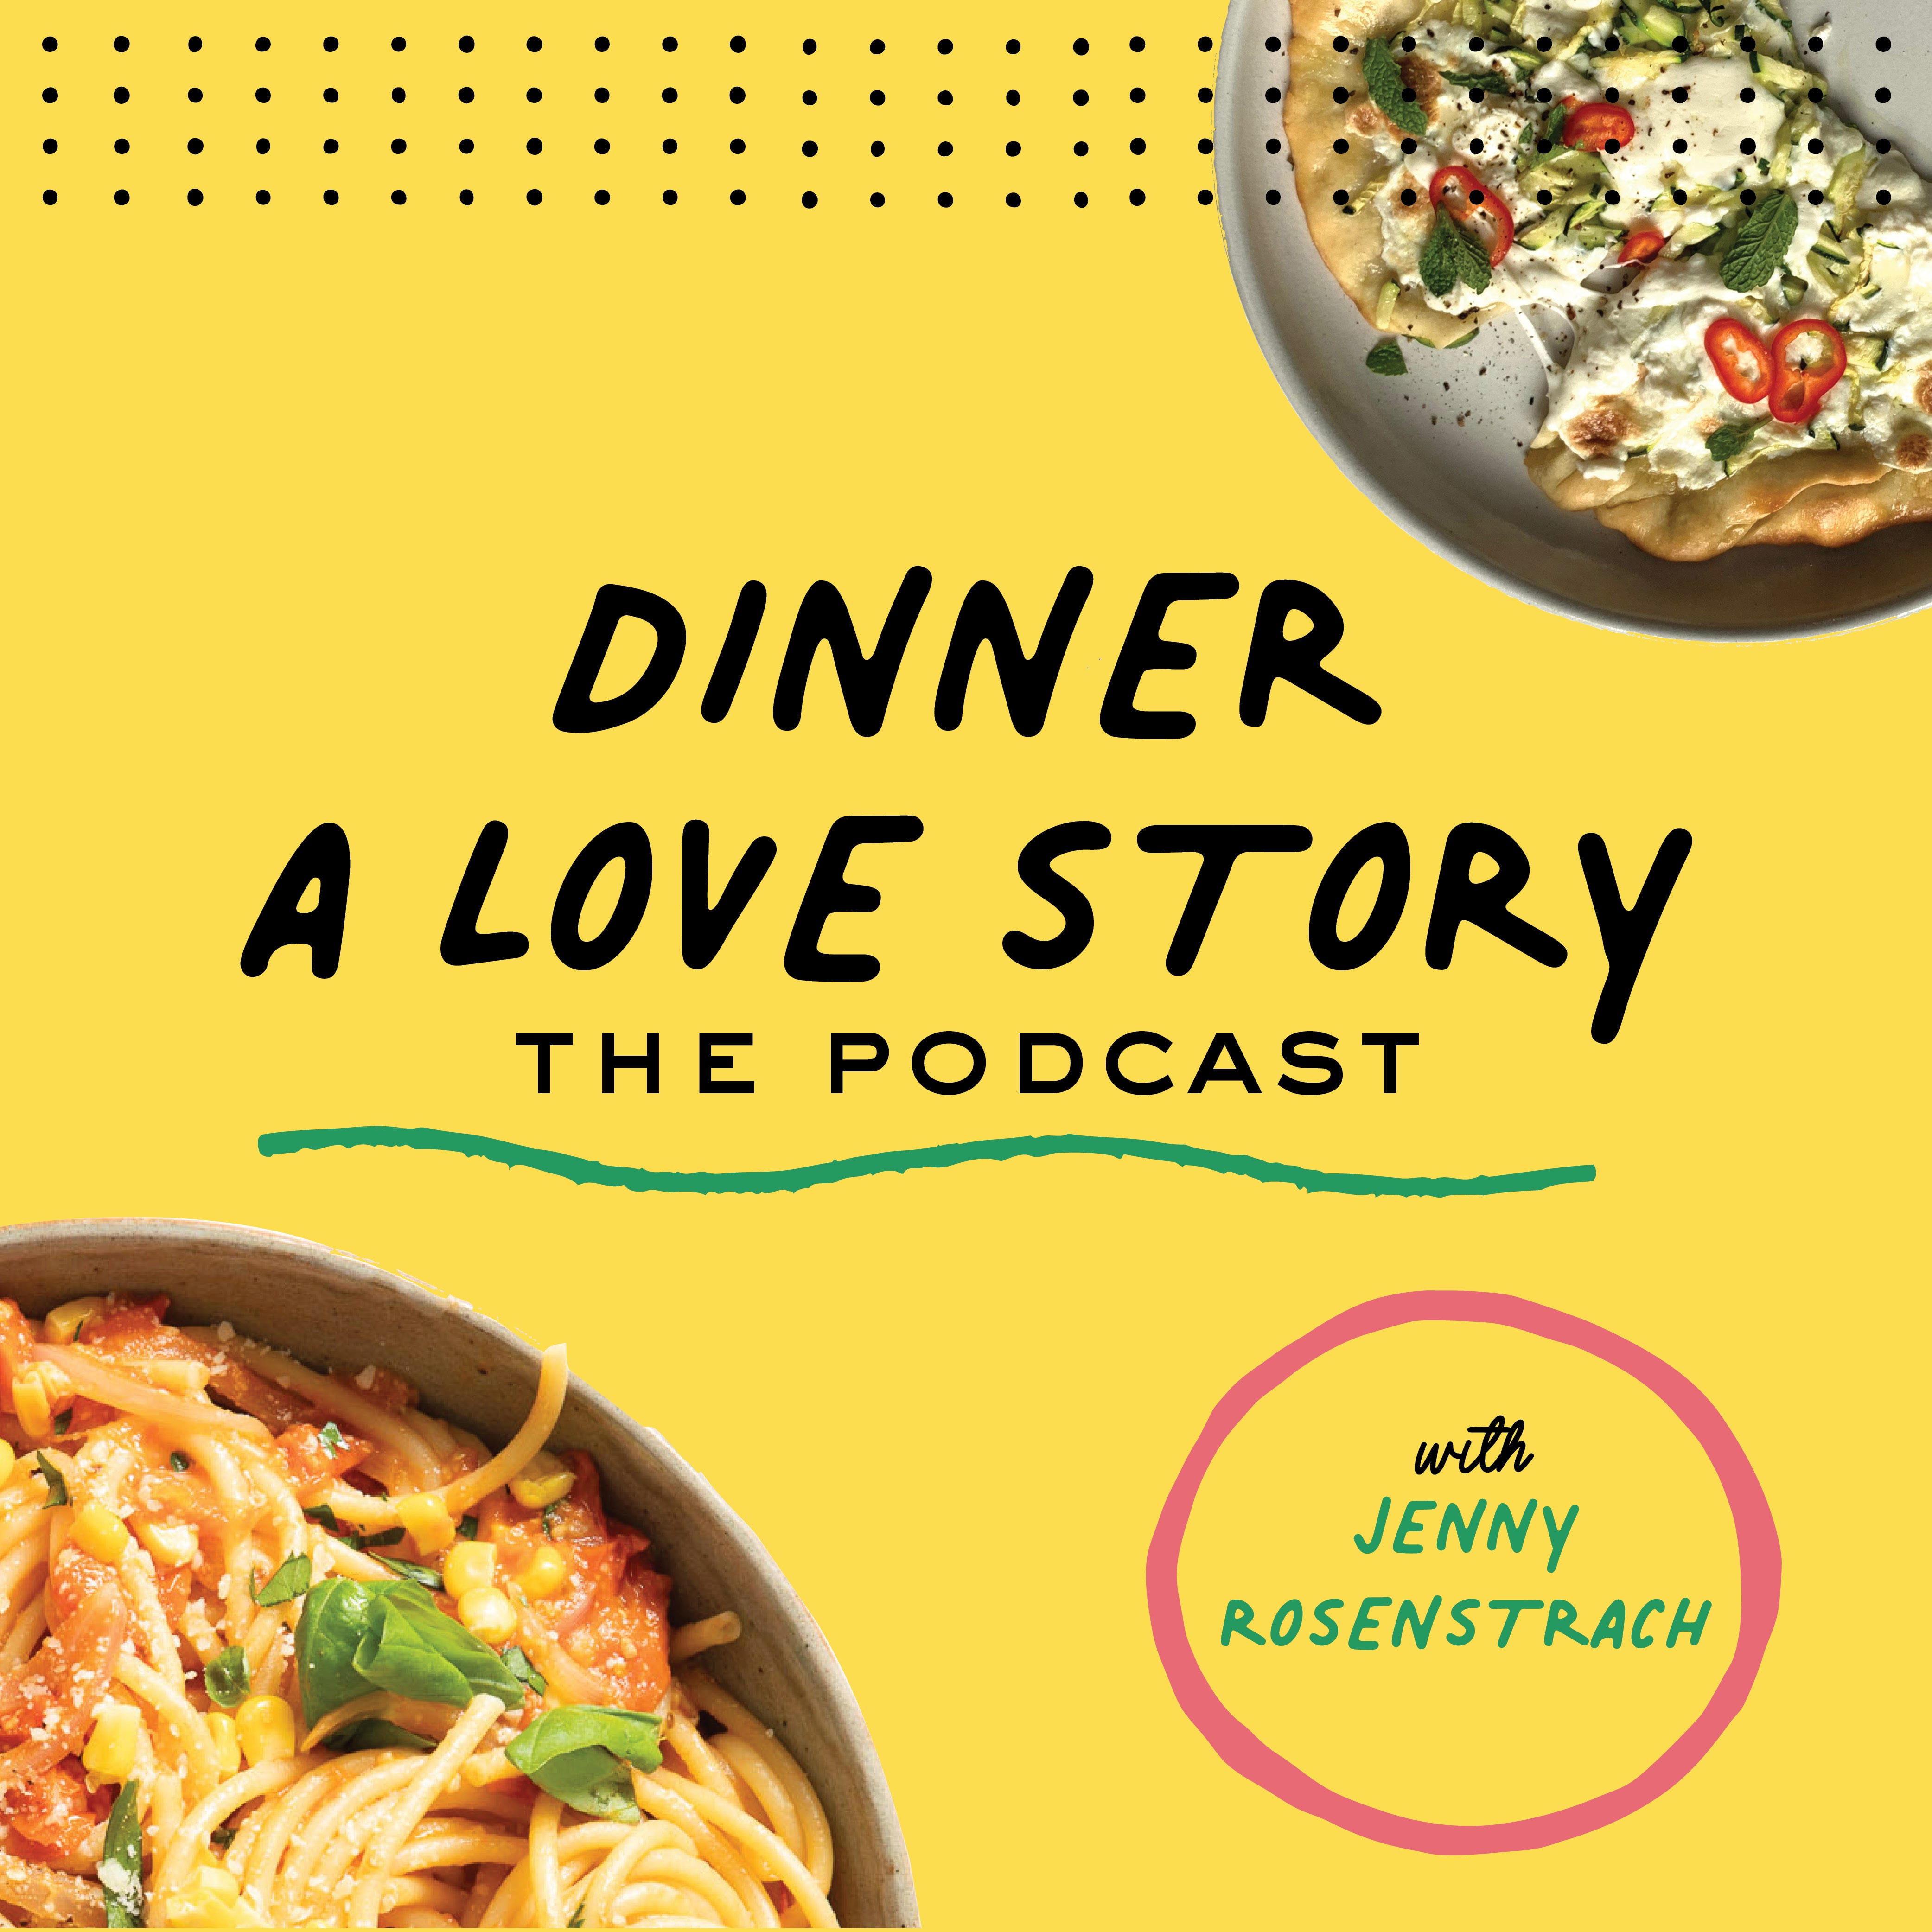 The Dinner: A Love Story Podcast, Episode 5